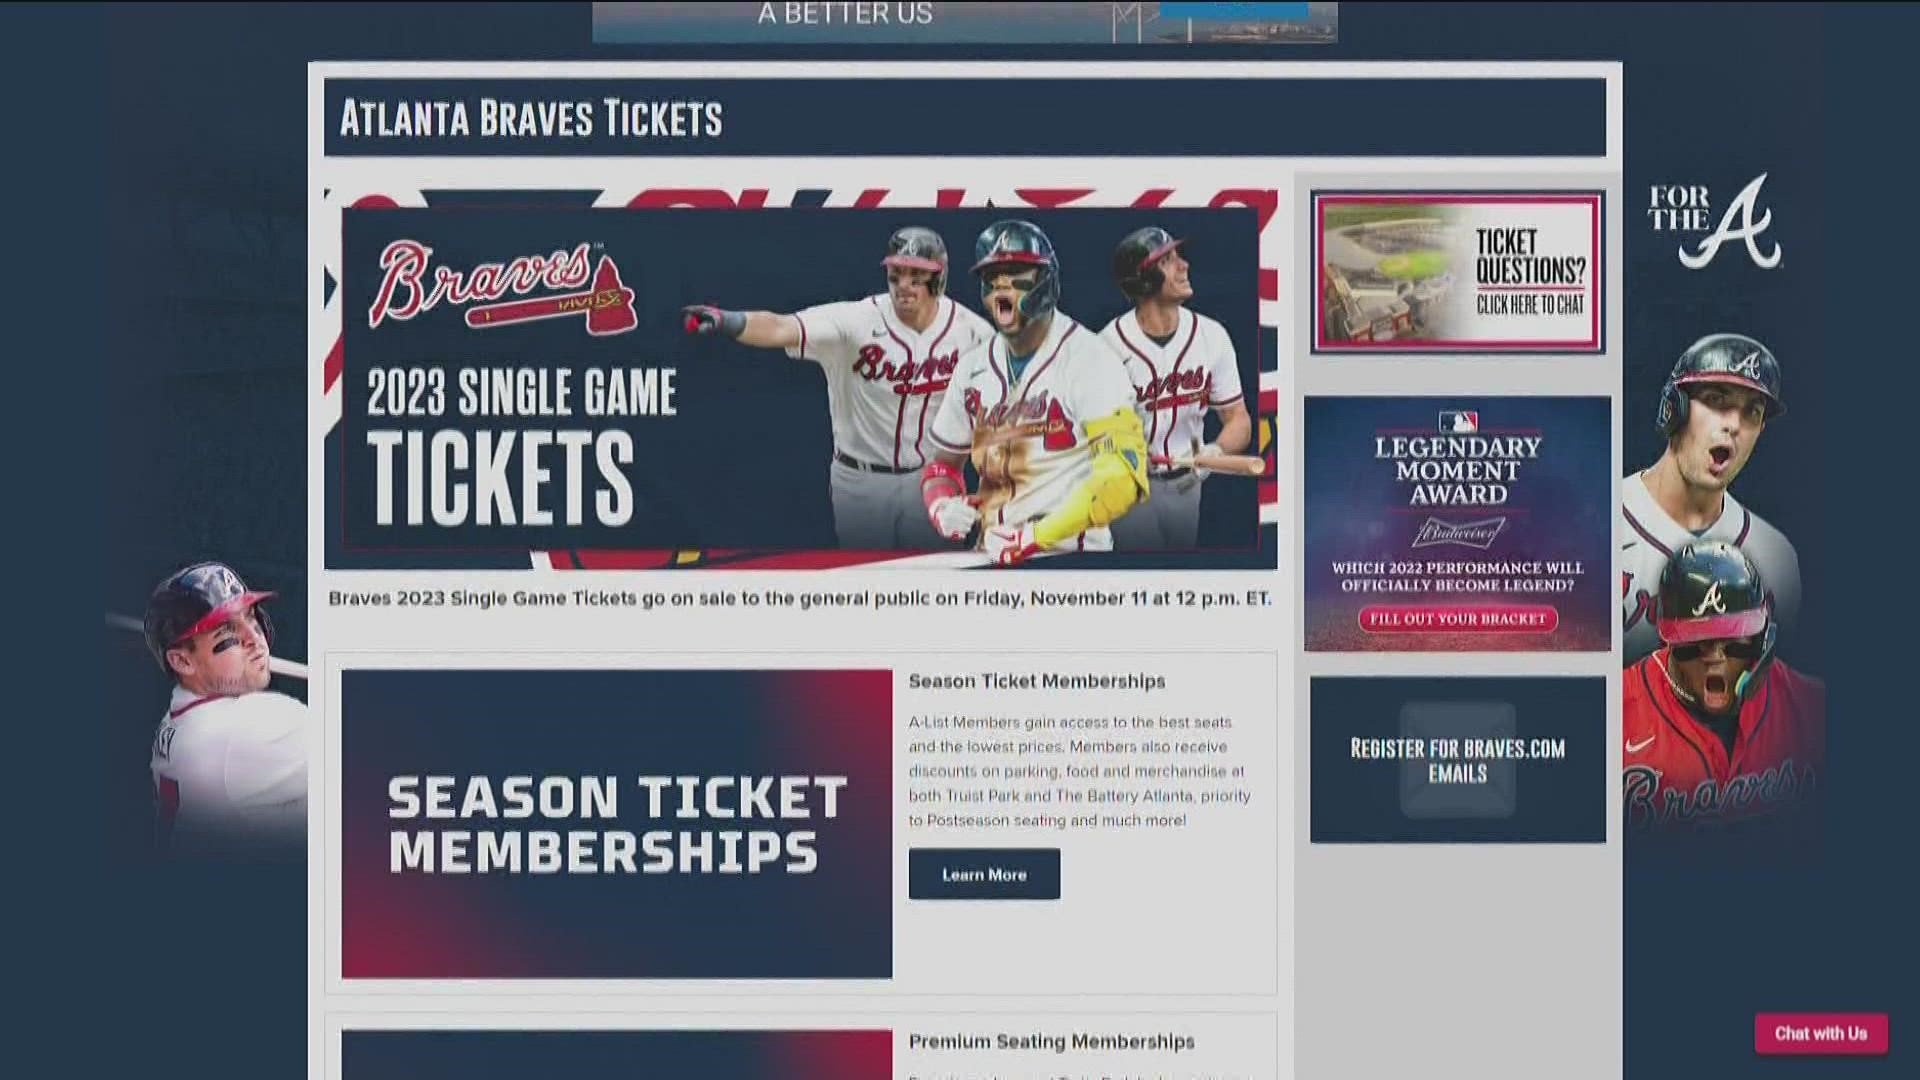 Get your tickets on the Braves website.